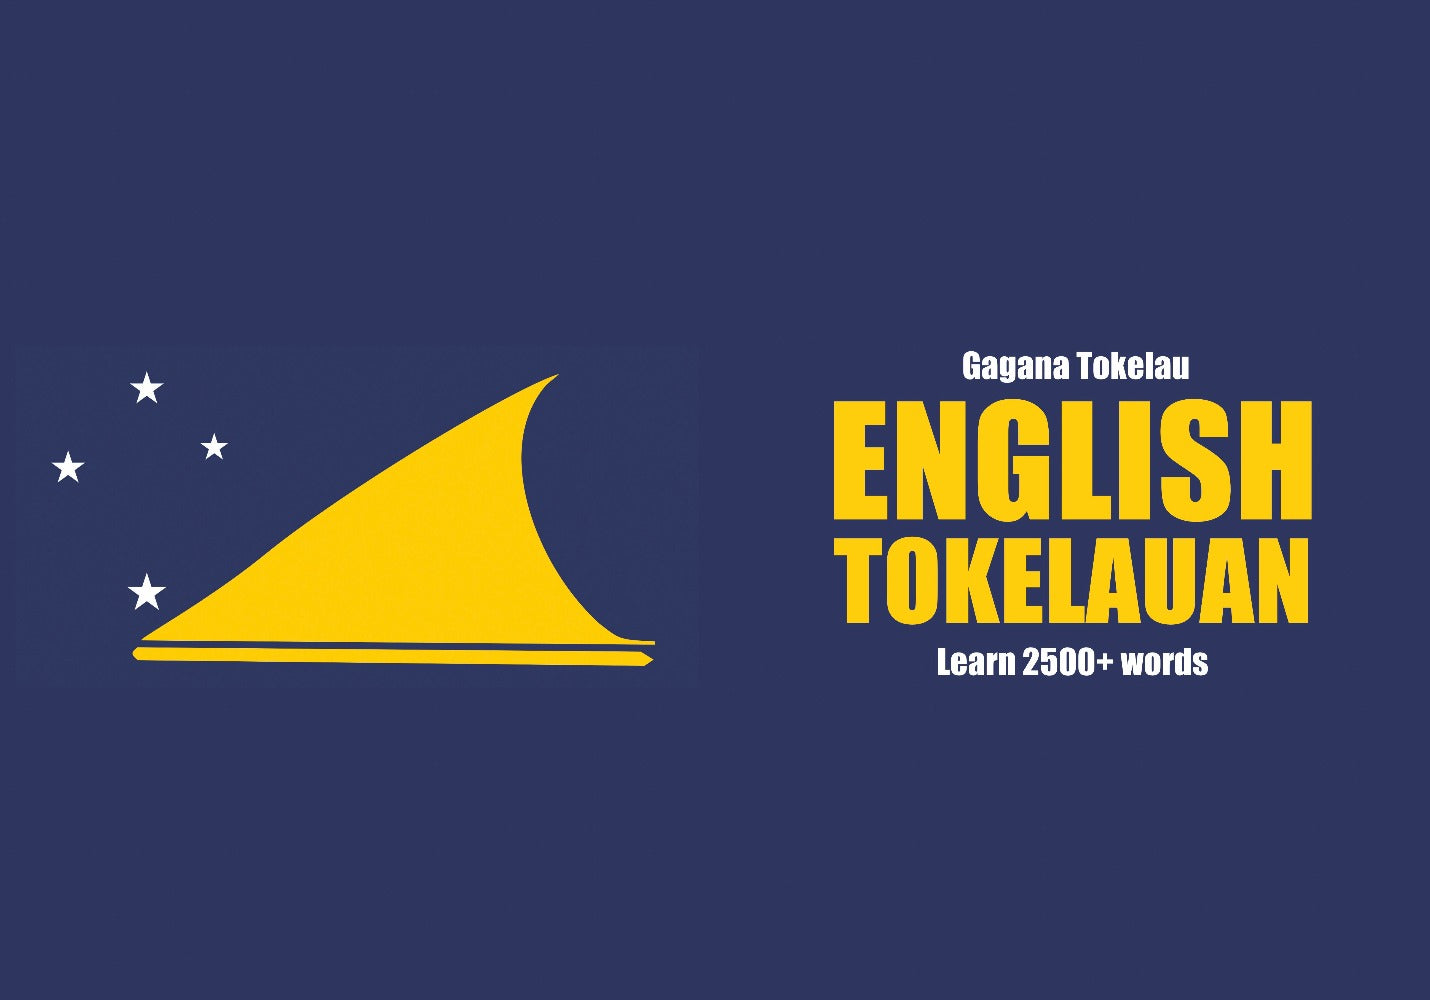 Tokelauan language learning notebook cover